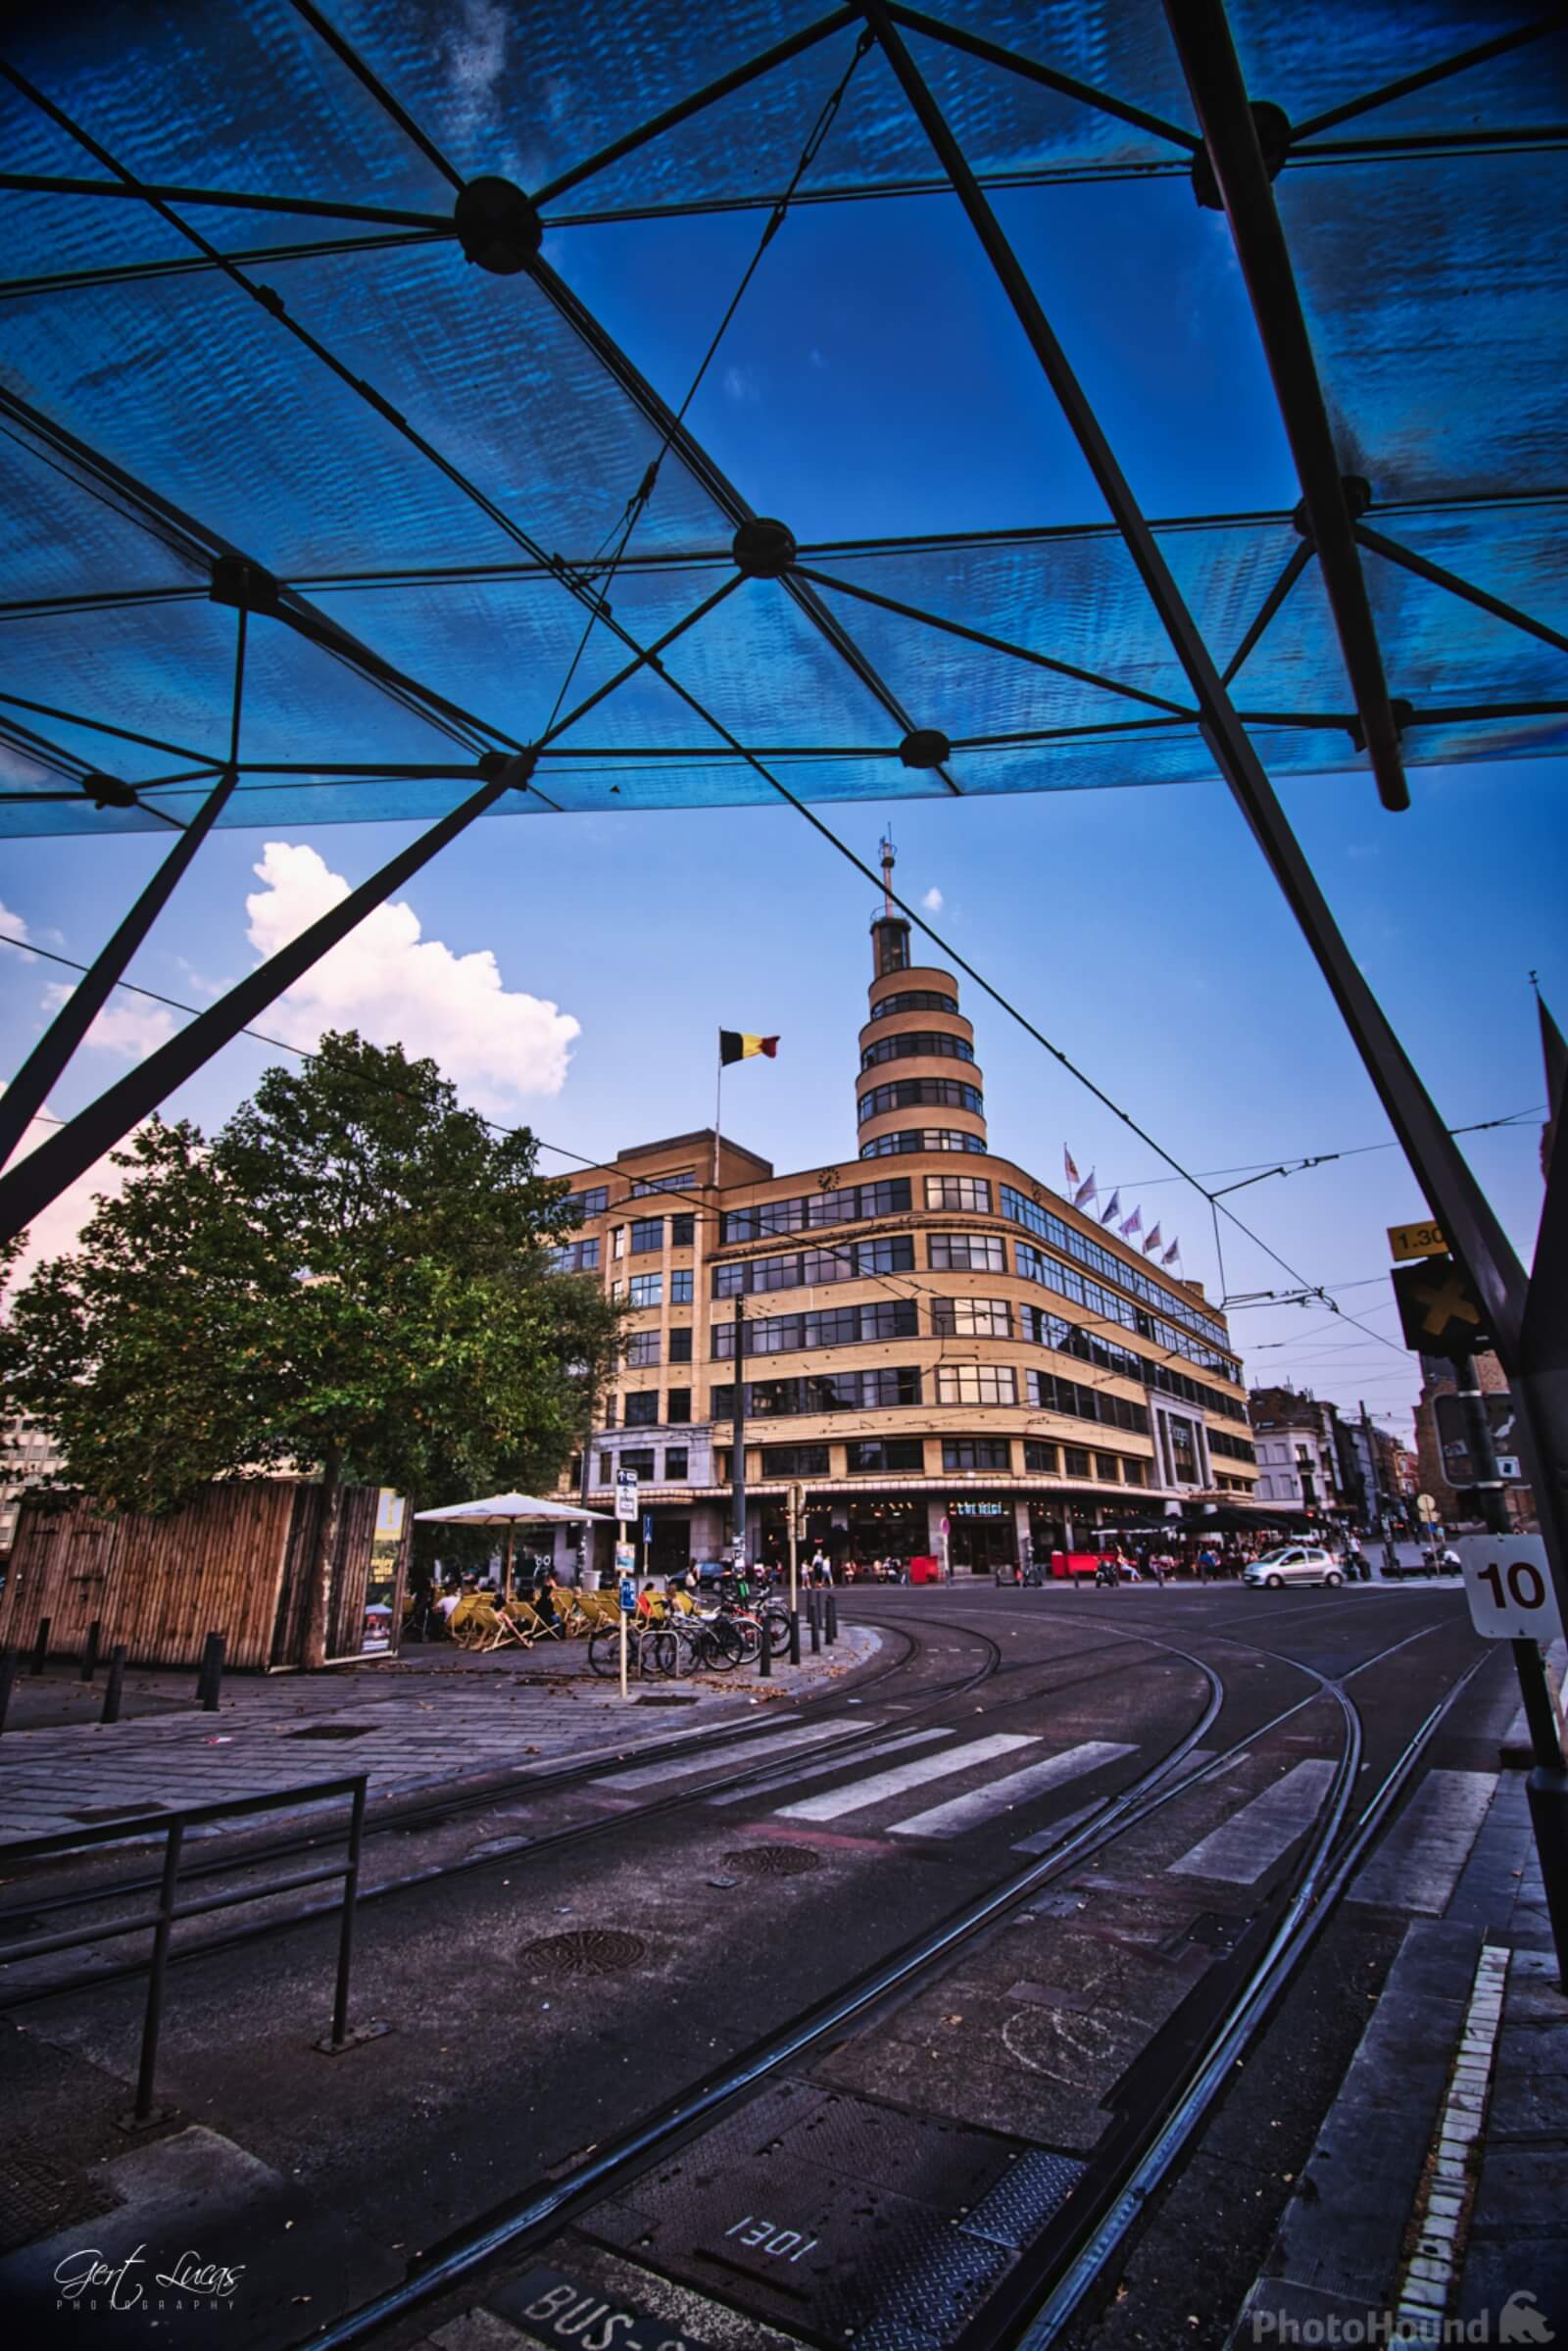 Image of Flagey Building by Gert Lucas